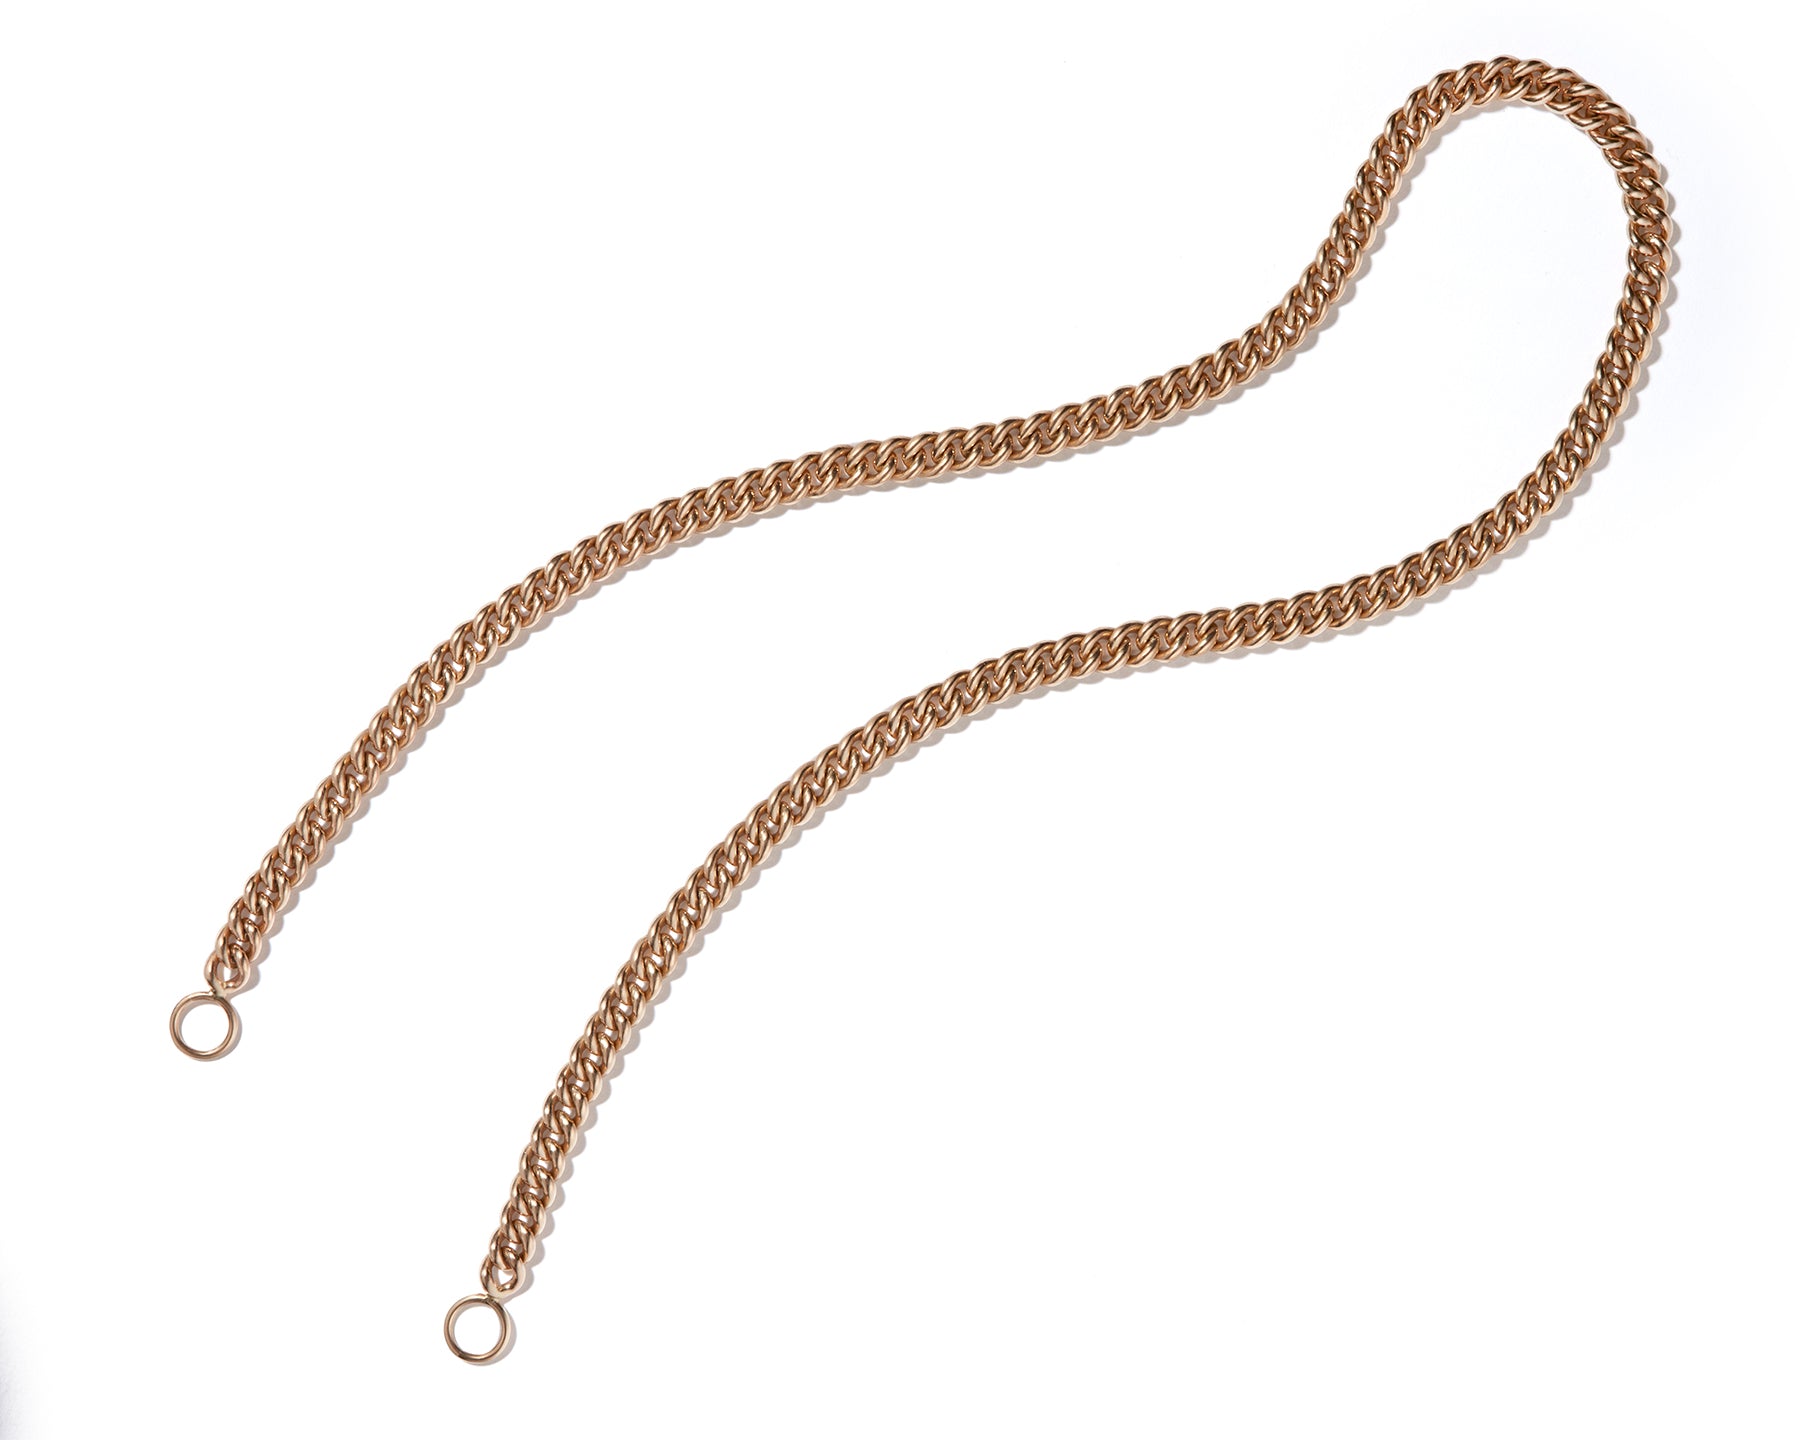 Silver Heavy Curb Chain Necklace | Marla Aaron 20 / 14K Yellow Gold / Sterling Silver